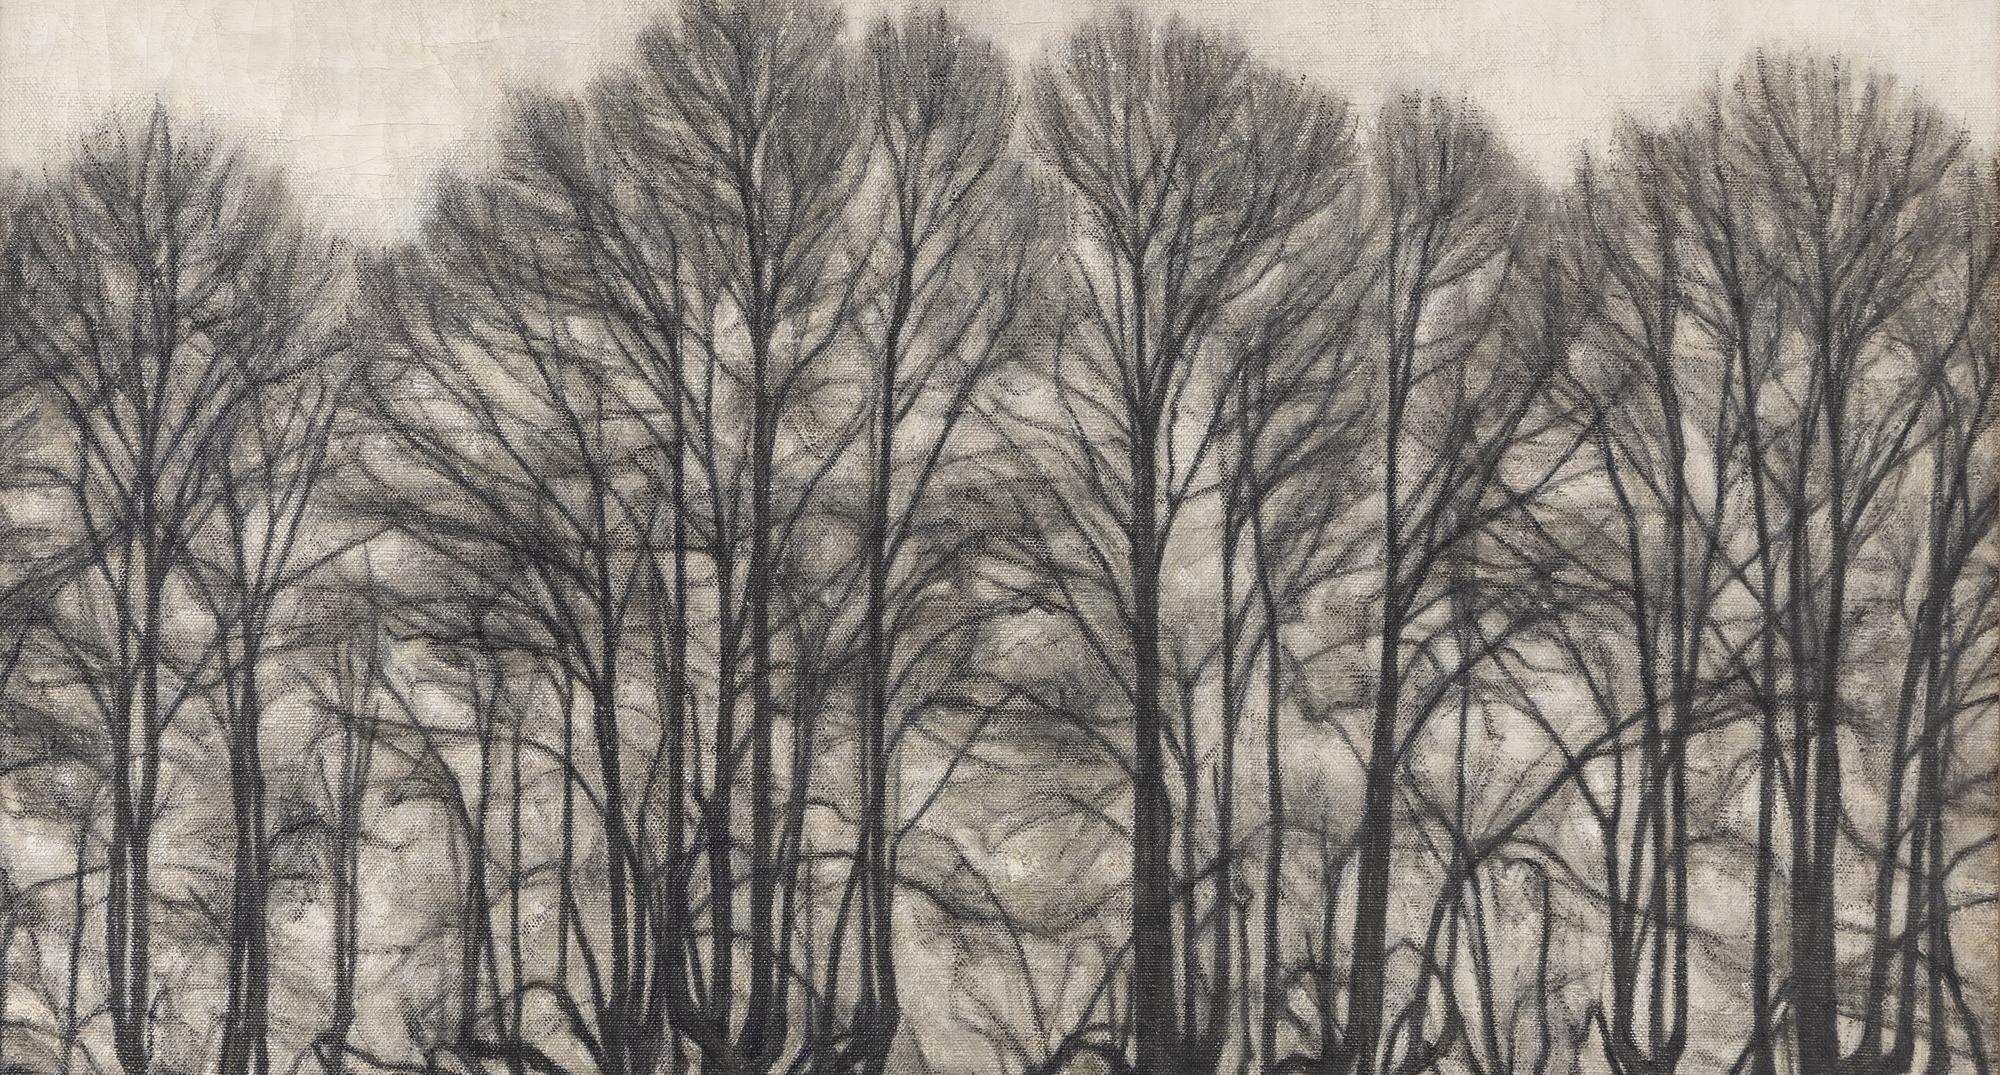 Svend Hammershøi: 'Bare Trees'. Undated. Private collection.
